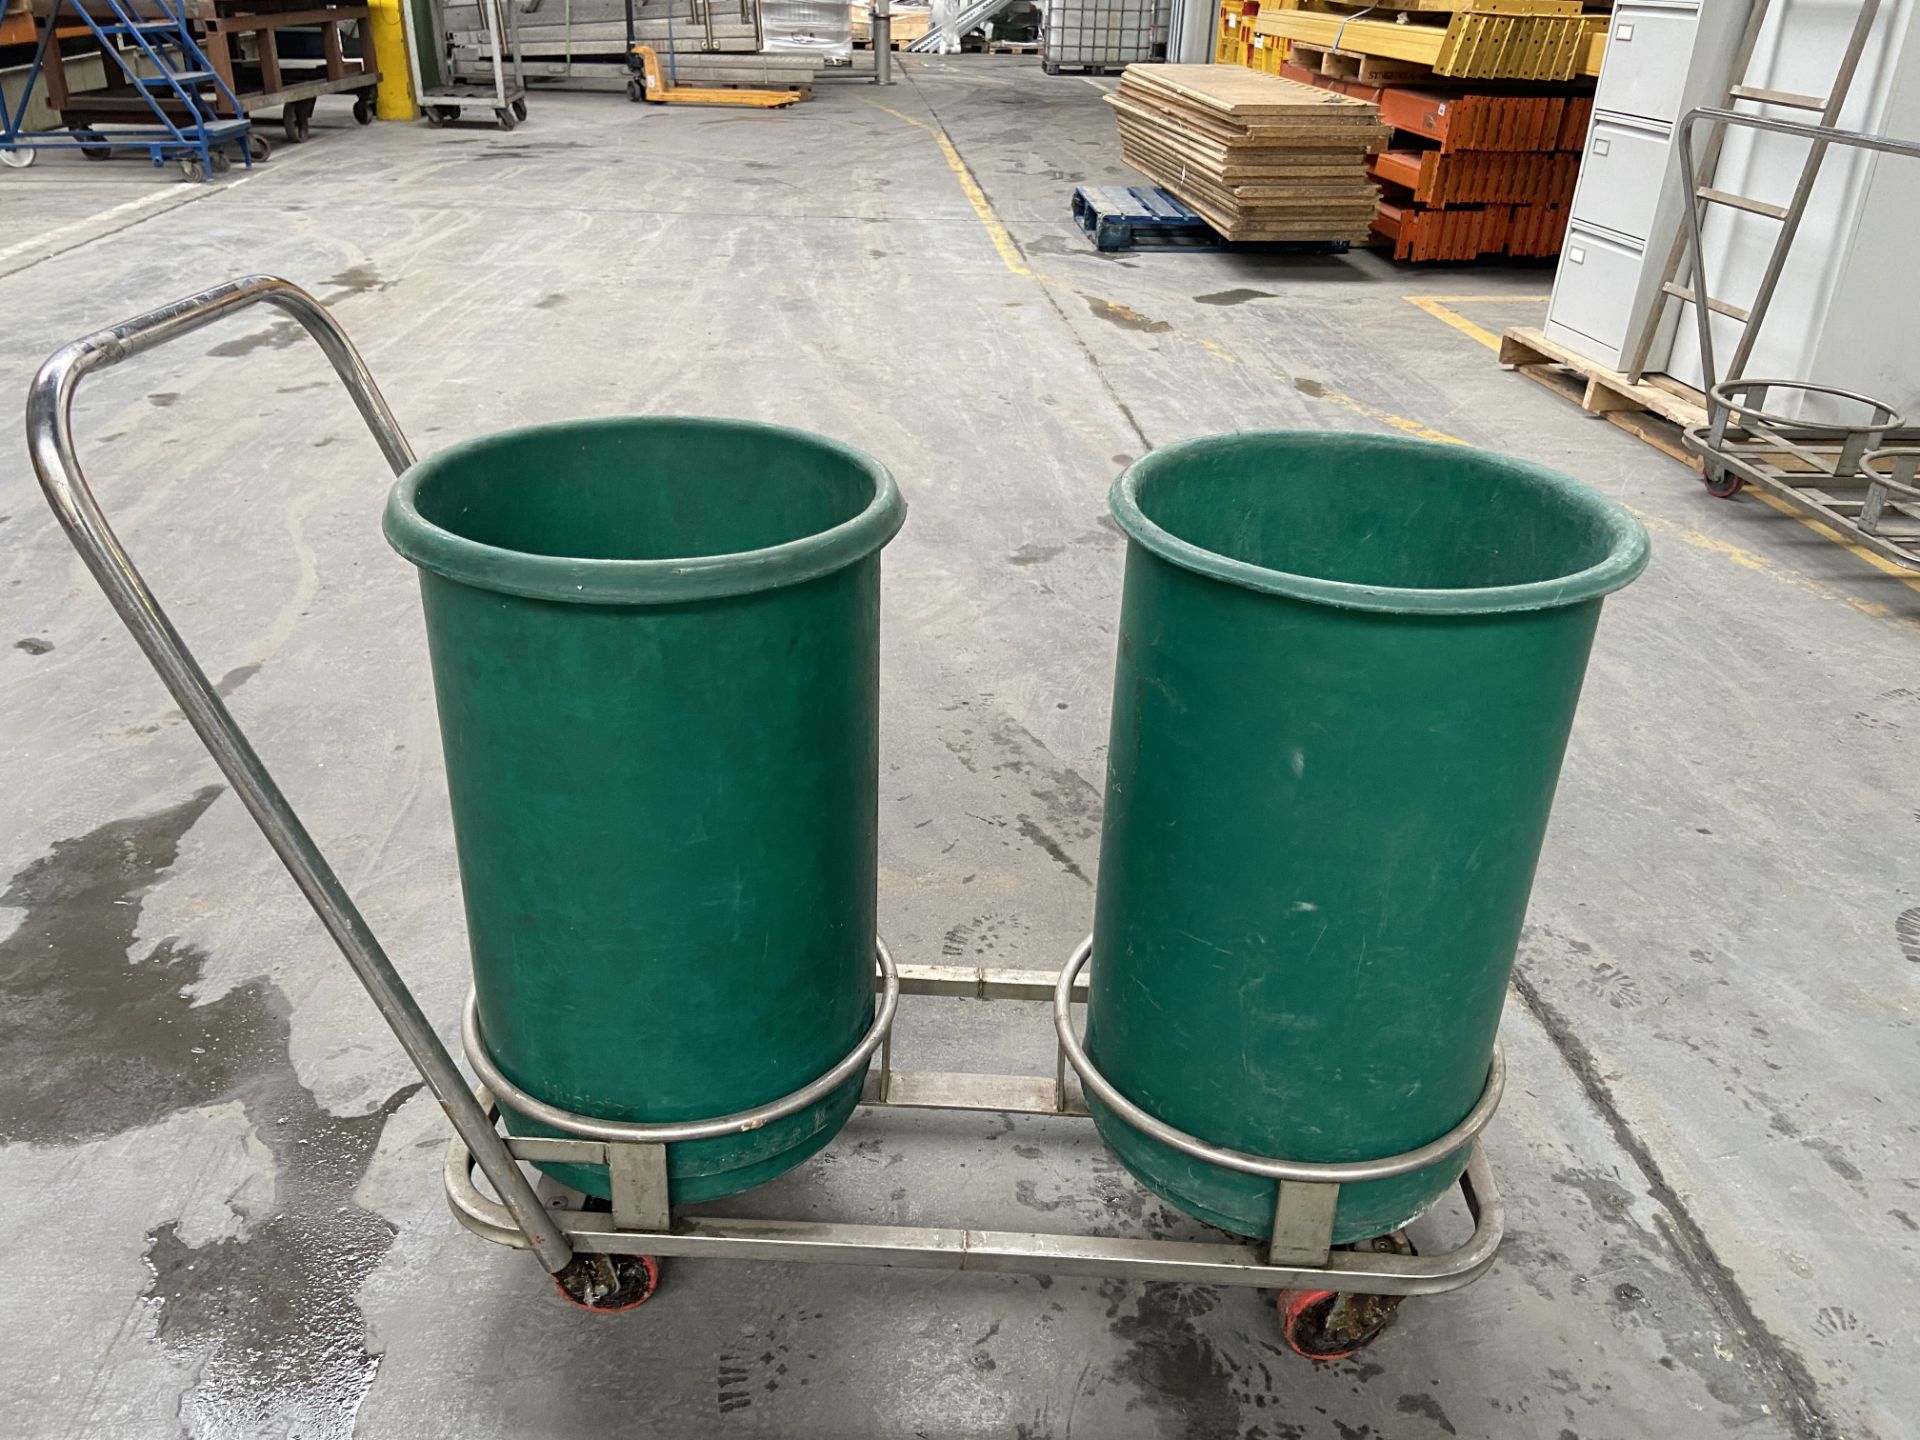 Two Tub Trolley, with tubs and lids - one frozen w